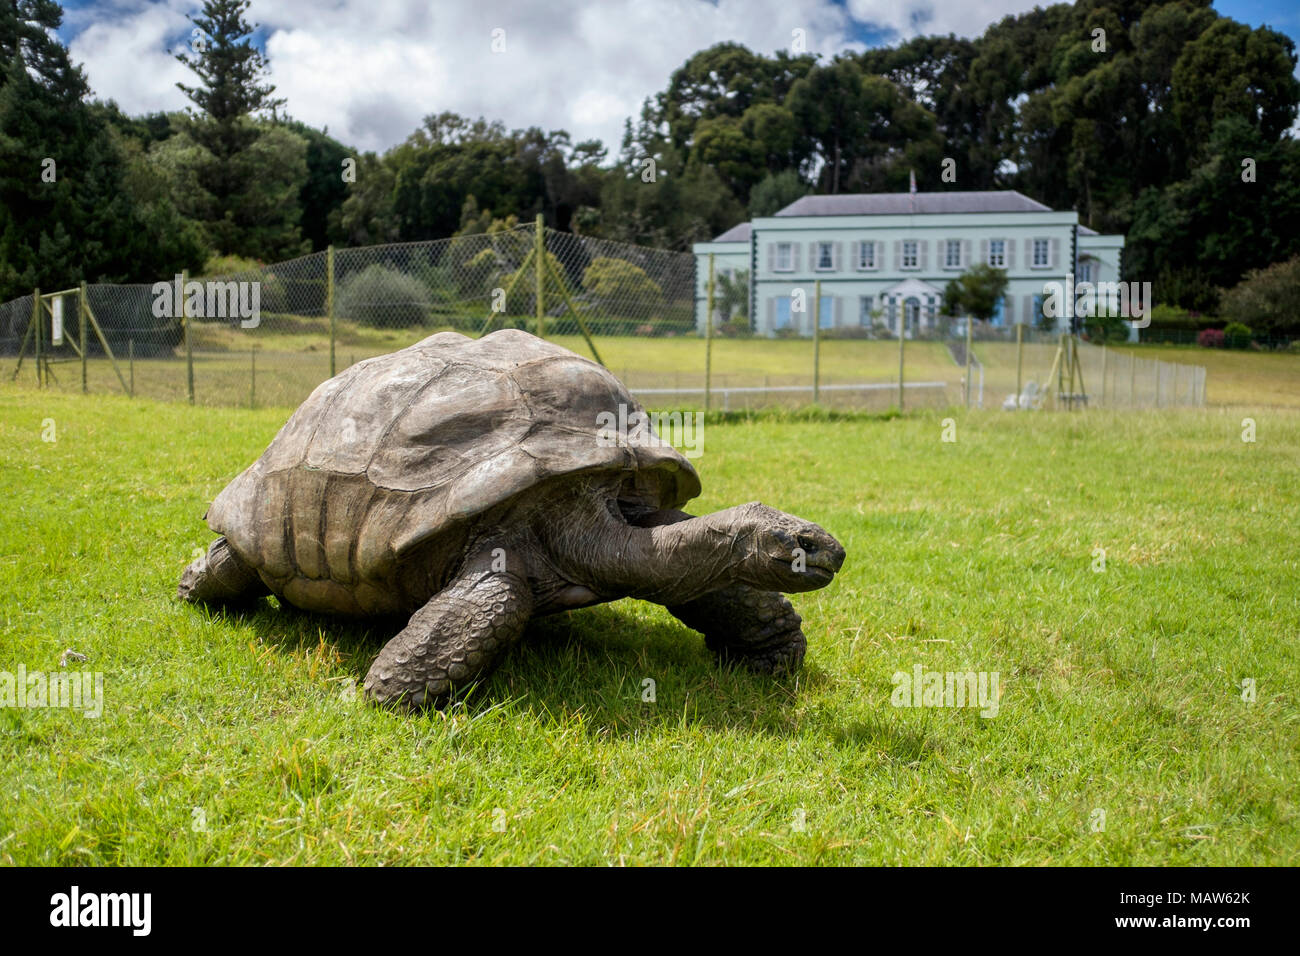 Jonathan, a giant Seychelles tortoise, the world's oldest known living terrestrial animal at around 190 years old. Plantation House, Saint Helena. Stock Photo